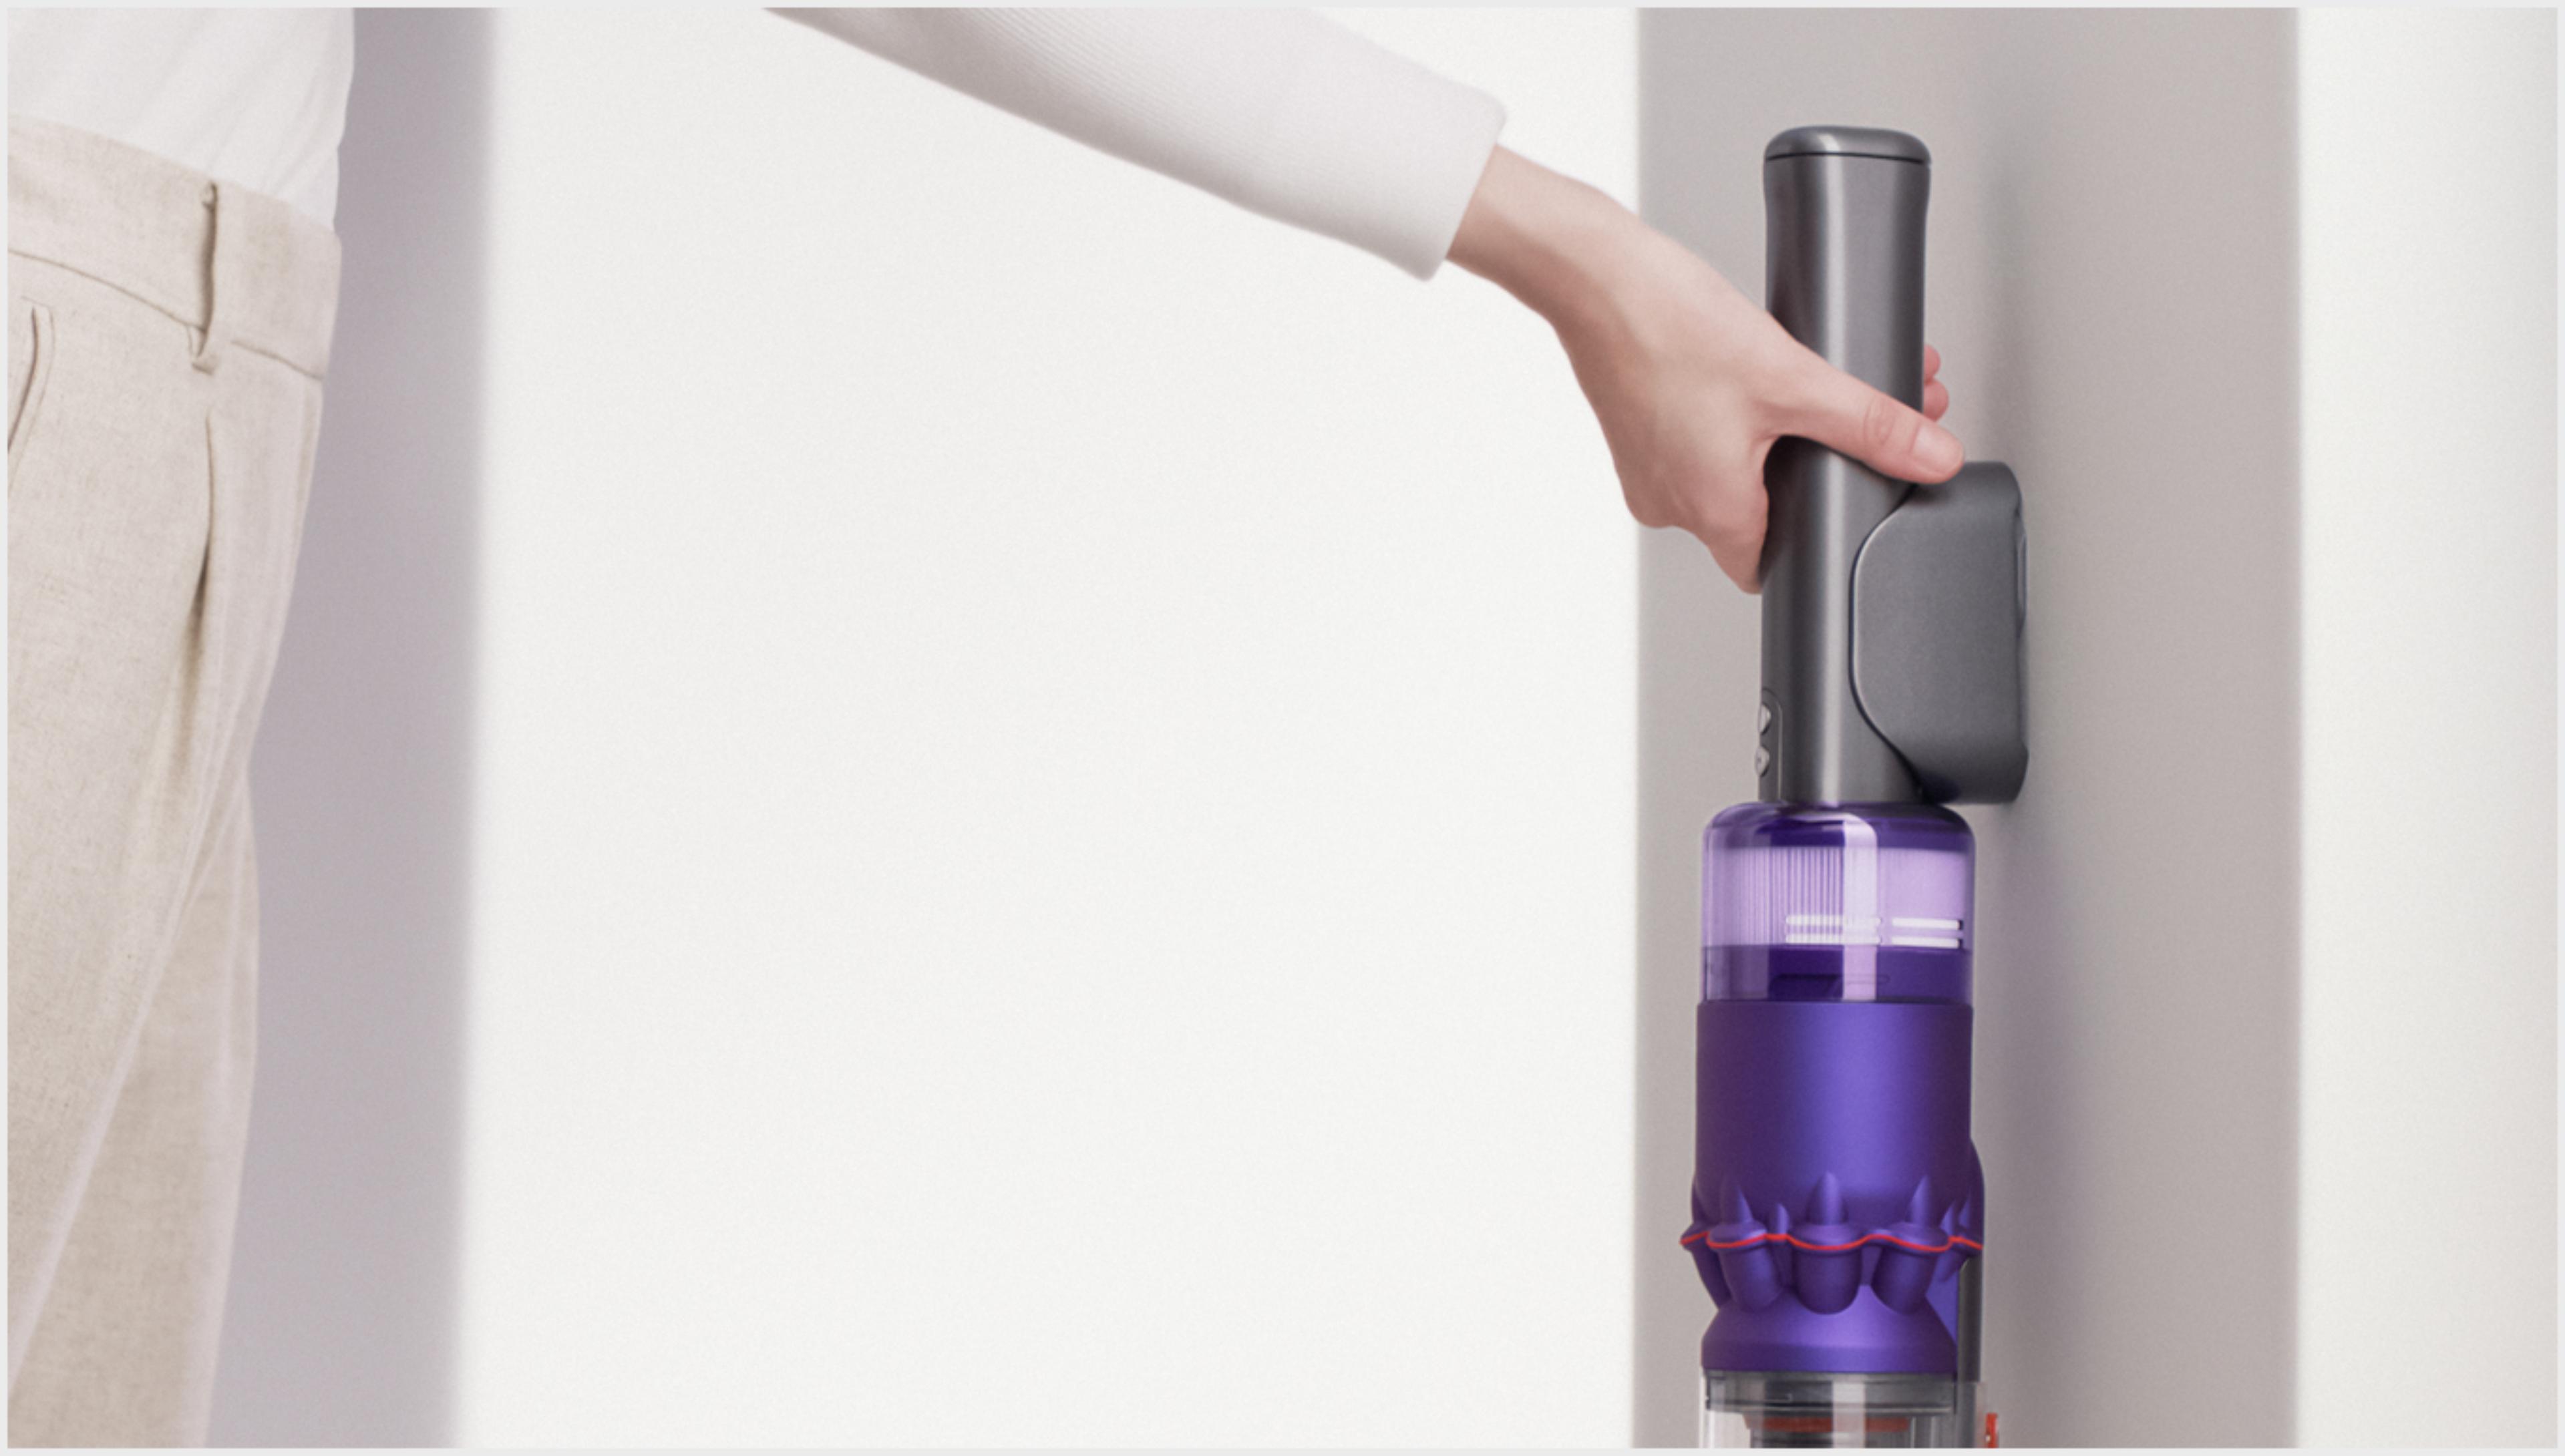 The Dyson Omni-glide vacuum in its wall dock